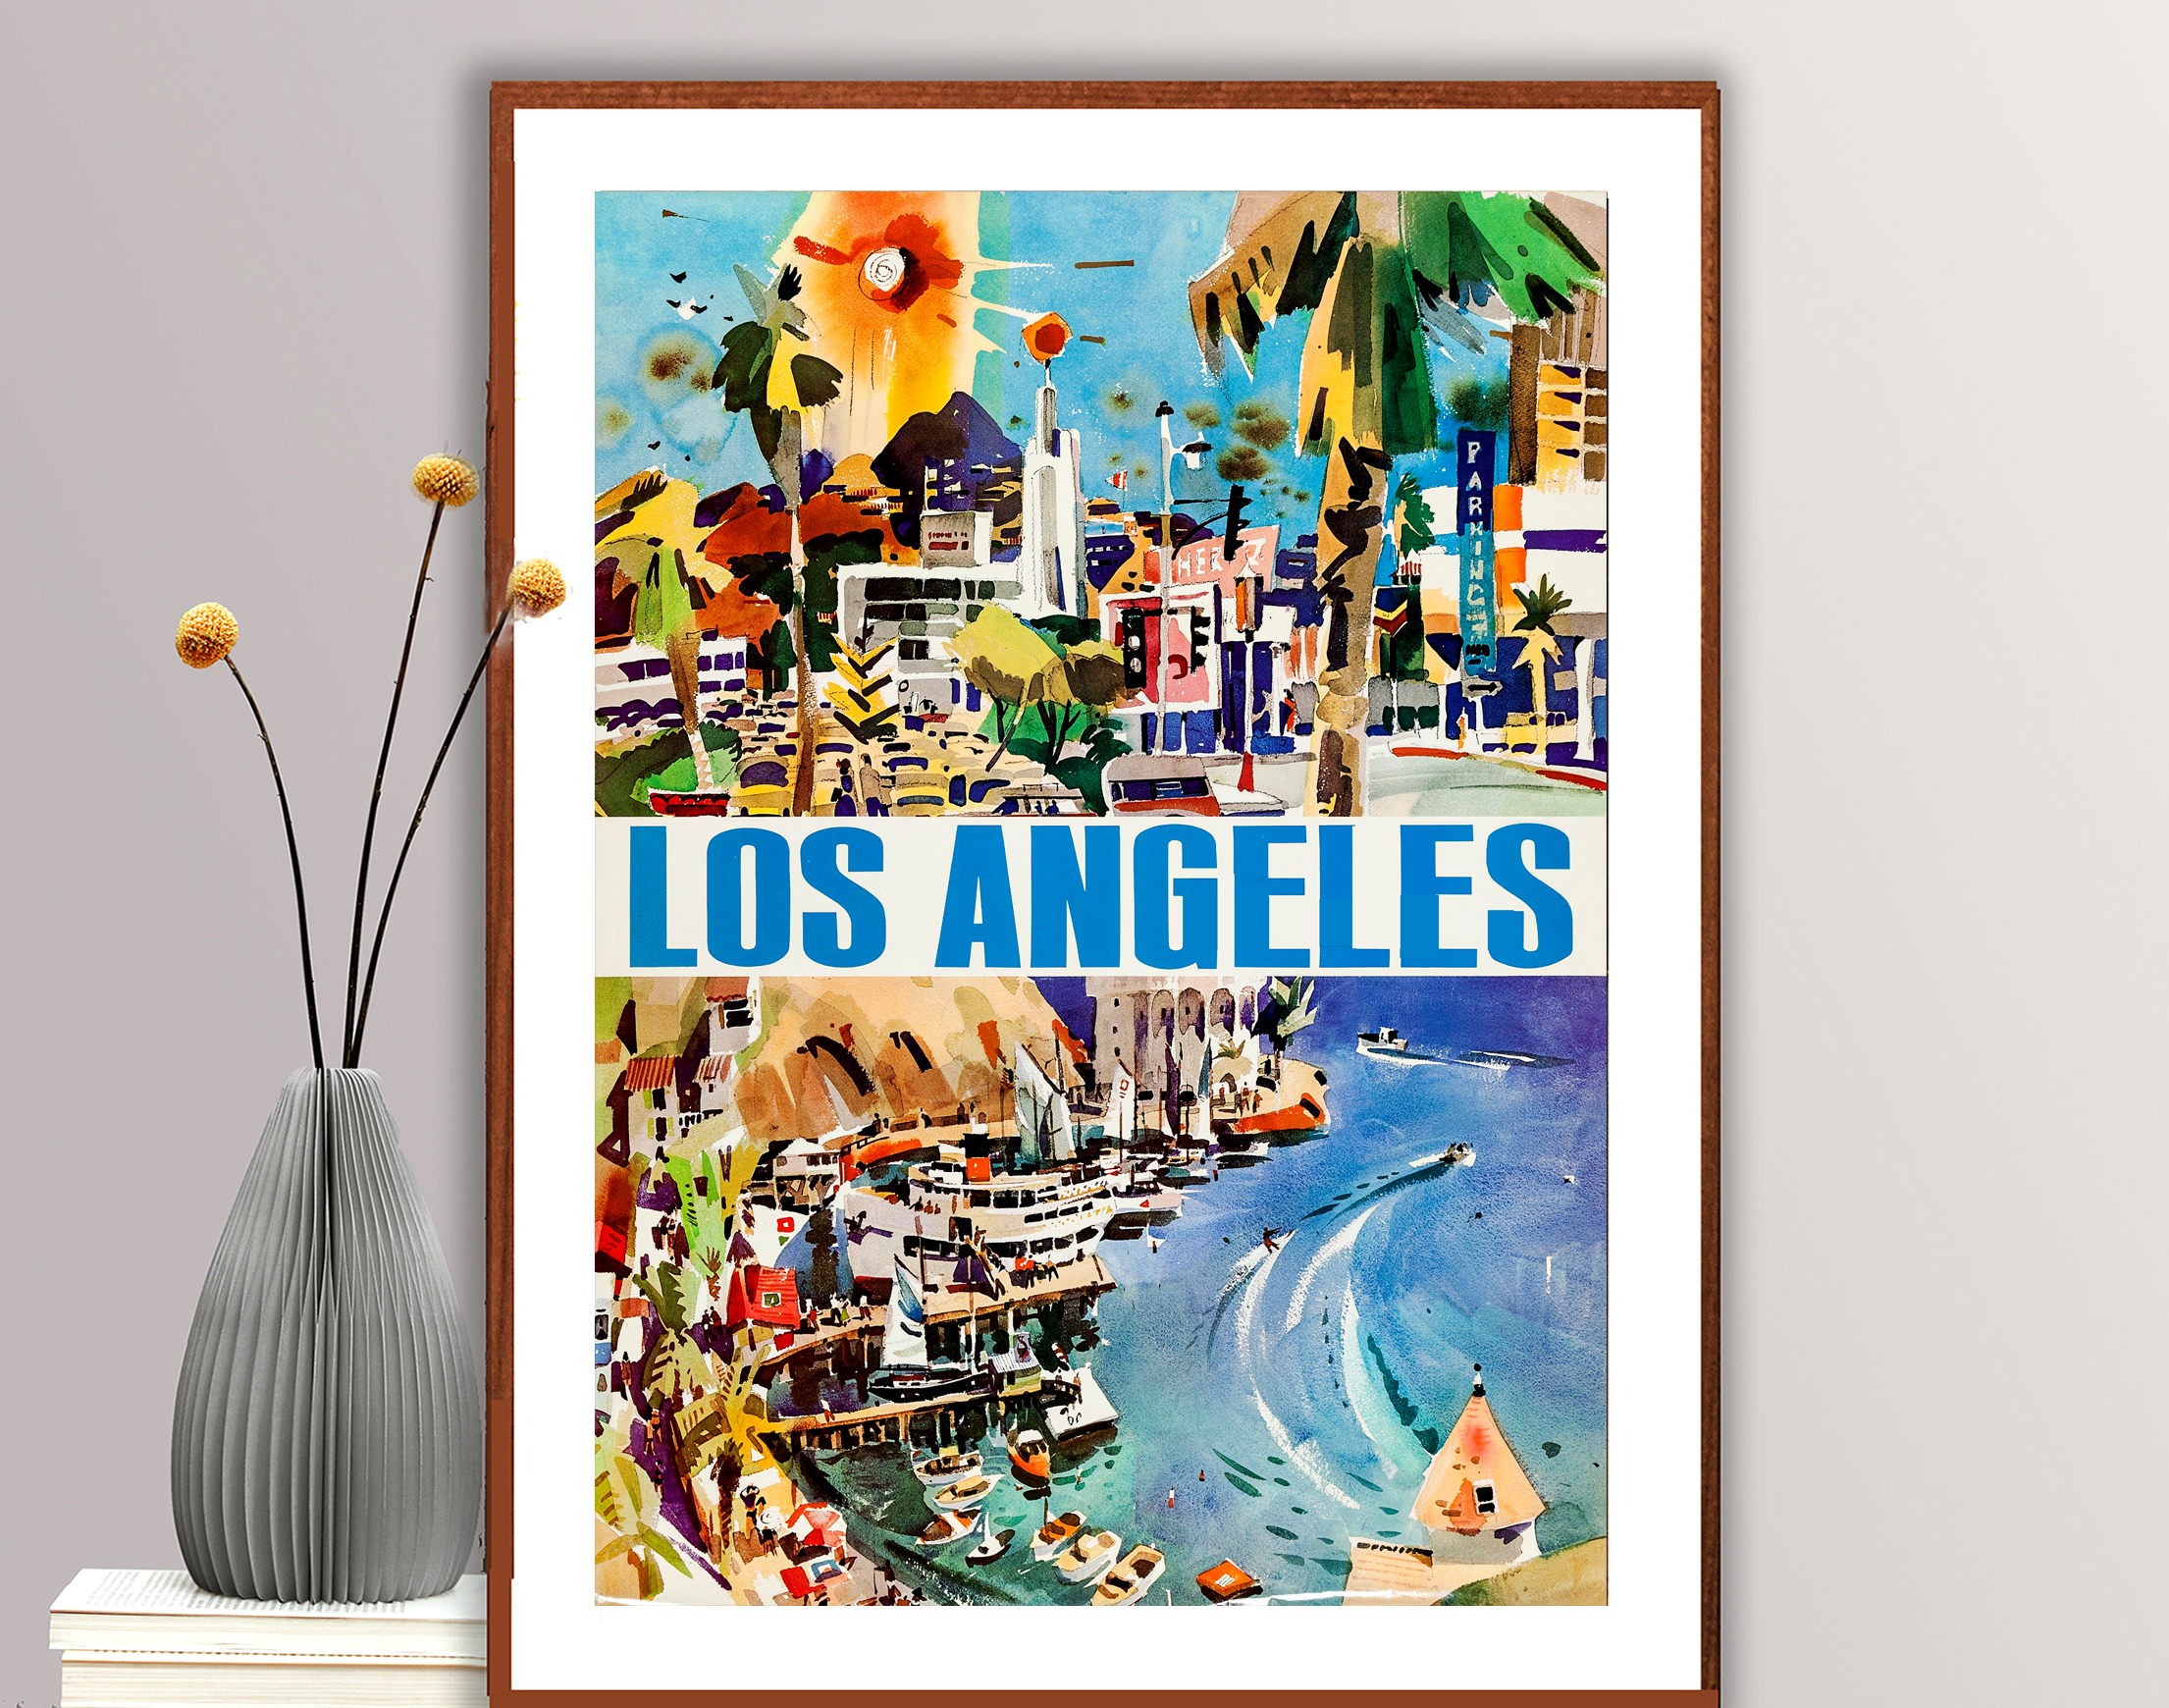 TX165 Vintage Los Angeles America Airline Travel Tourism Art Poster A3/A4 